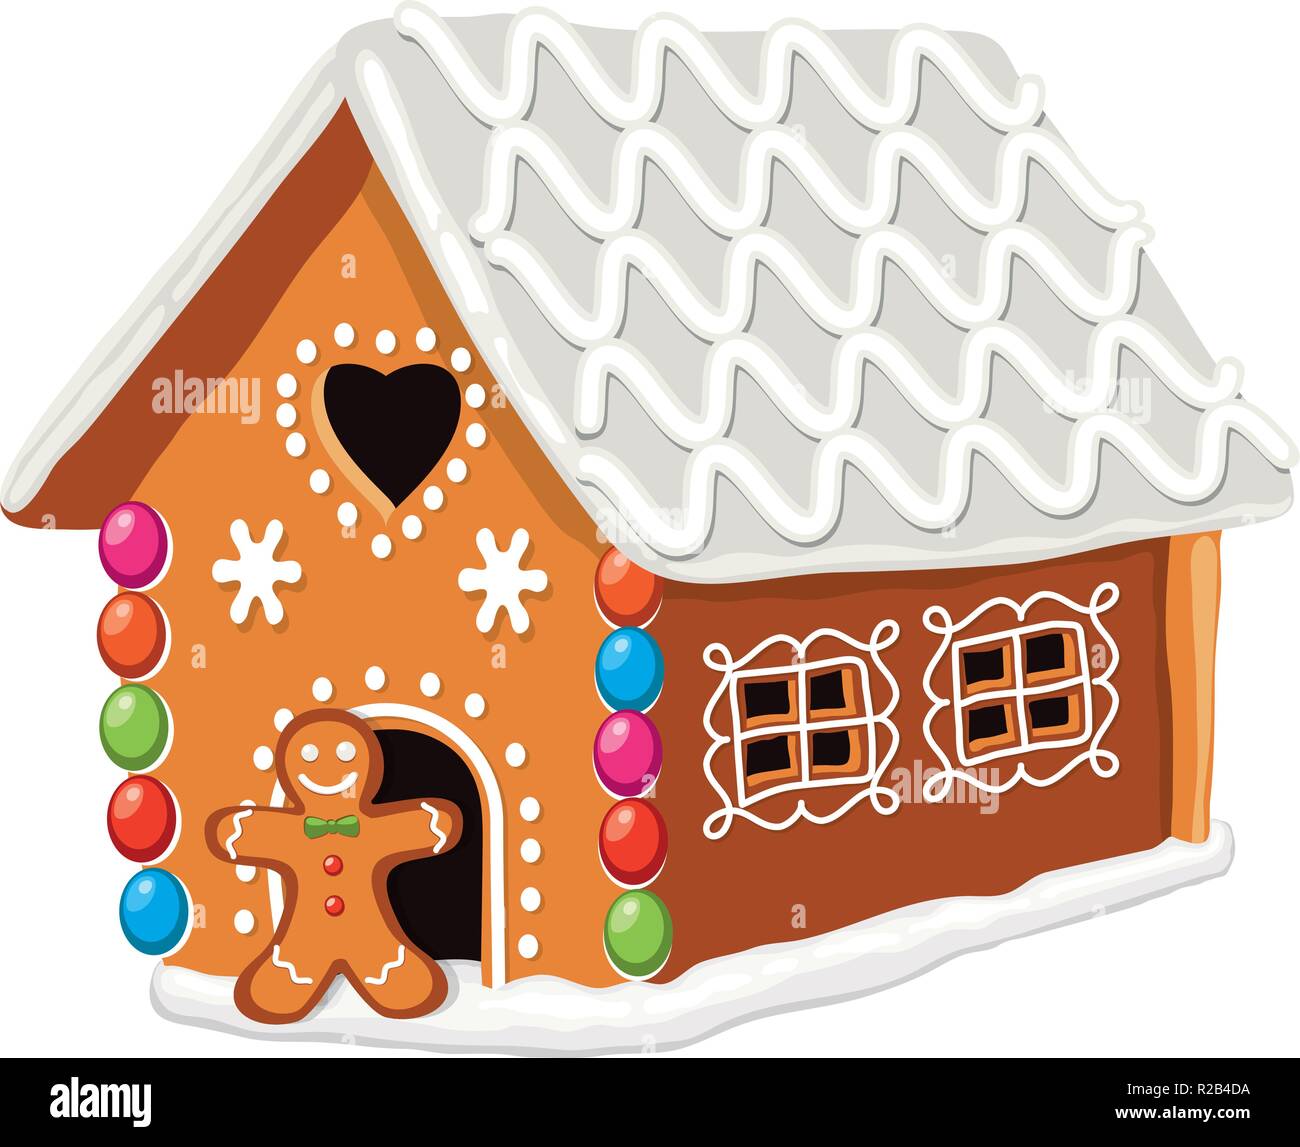 vector xmas colorful gingerbread house with sugar icing decoration and gingerbread cookie man. christmas holiday food background. sweet ginger bread d Stock Vector